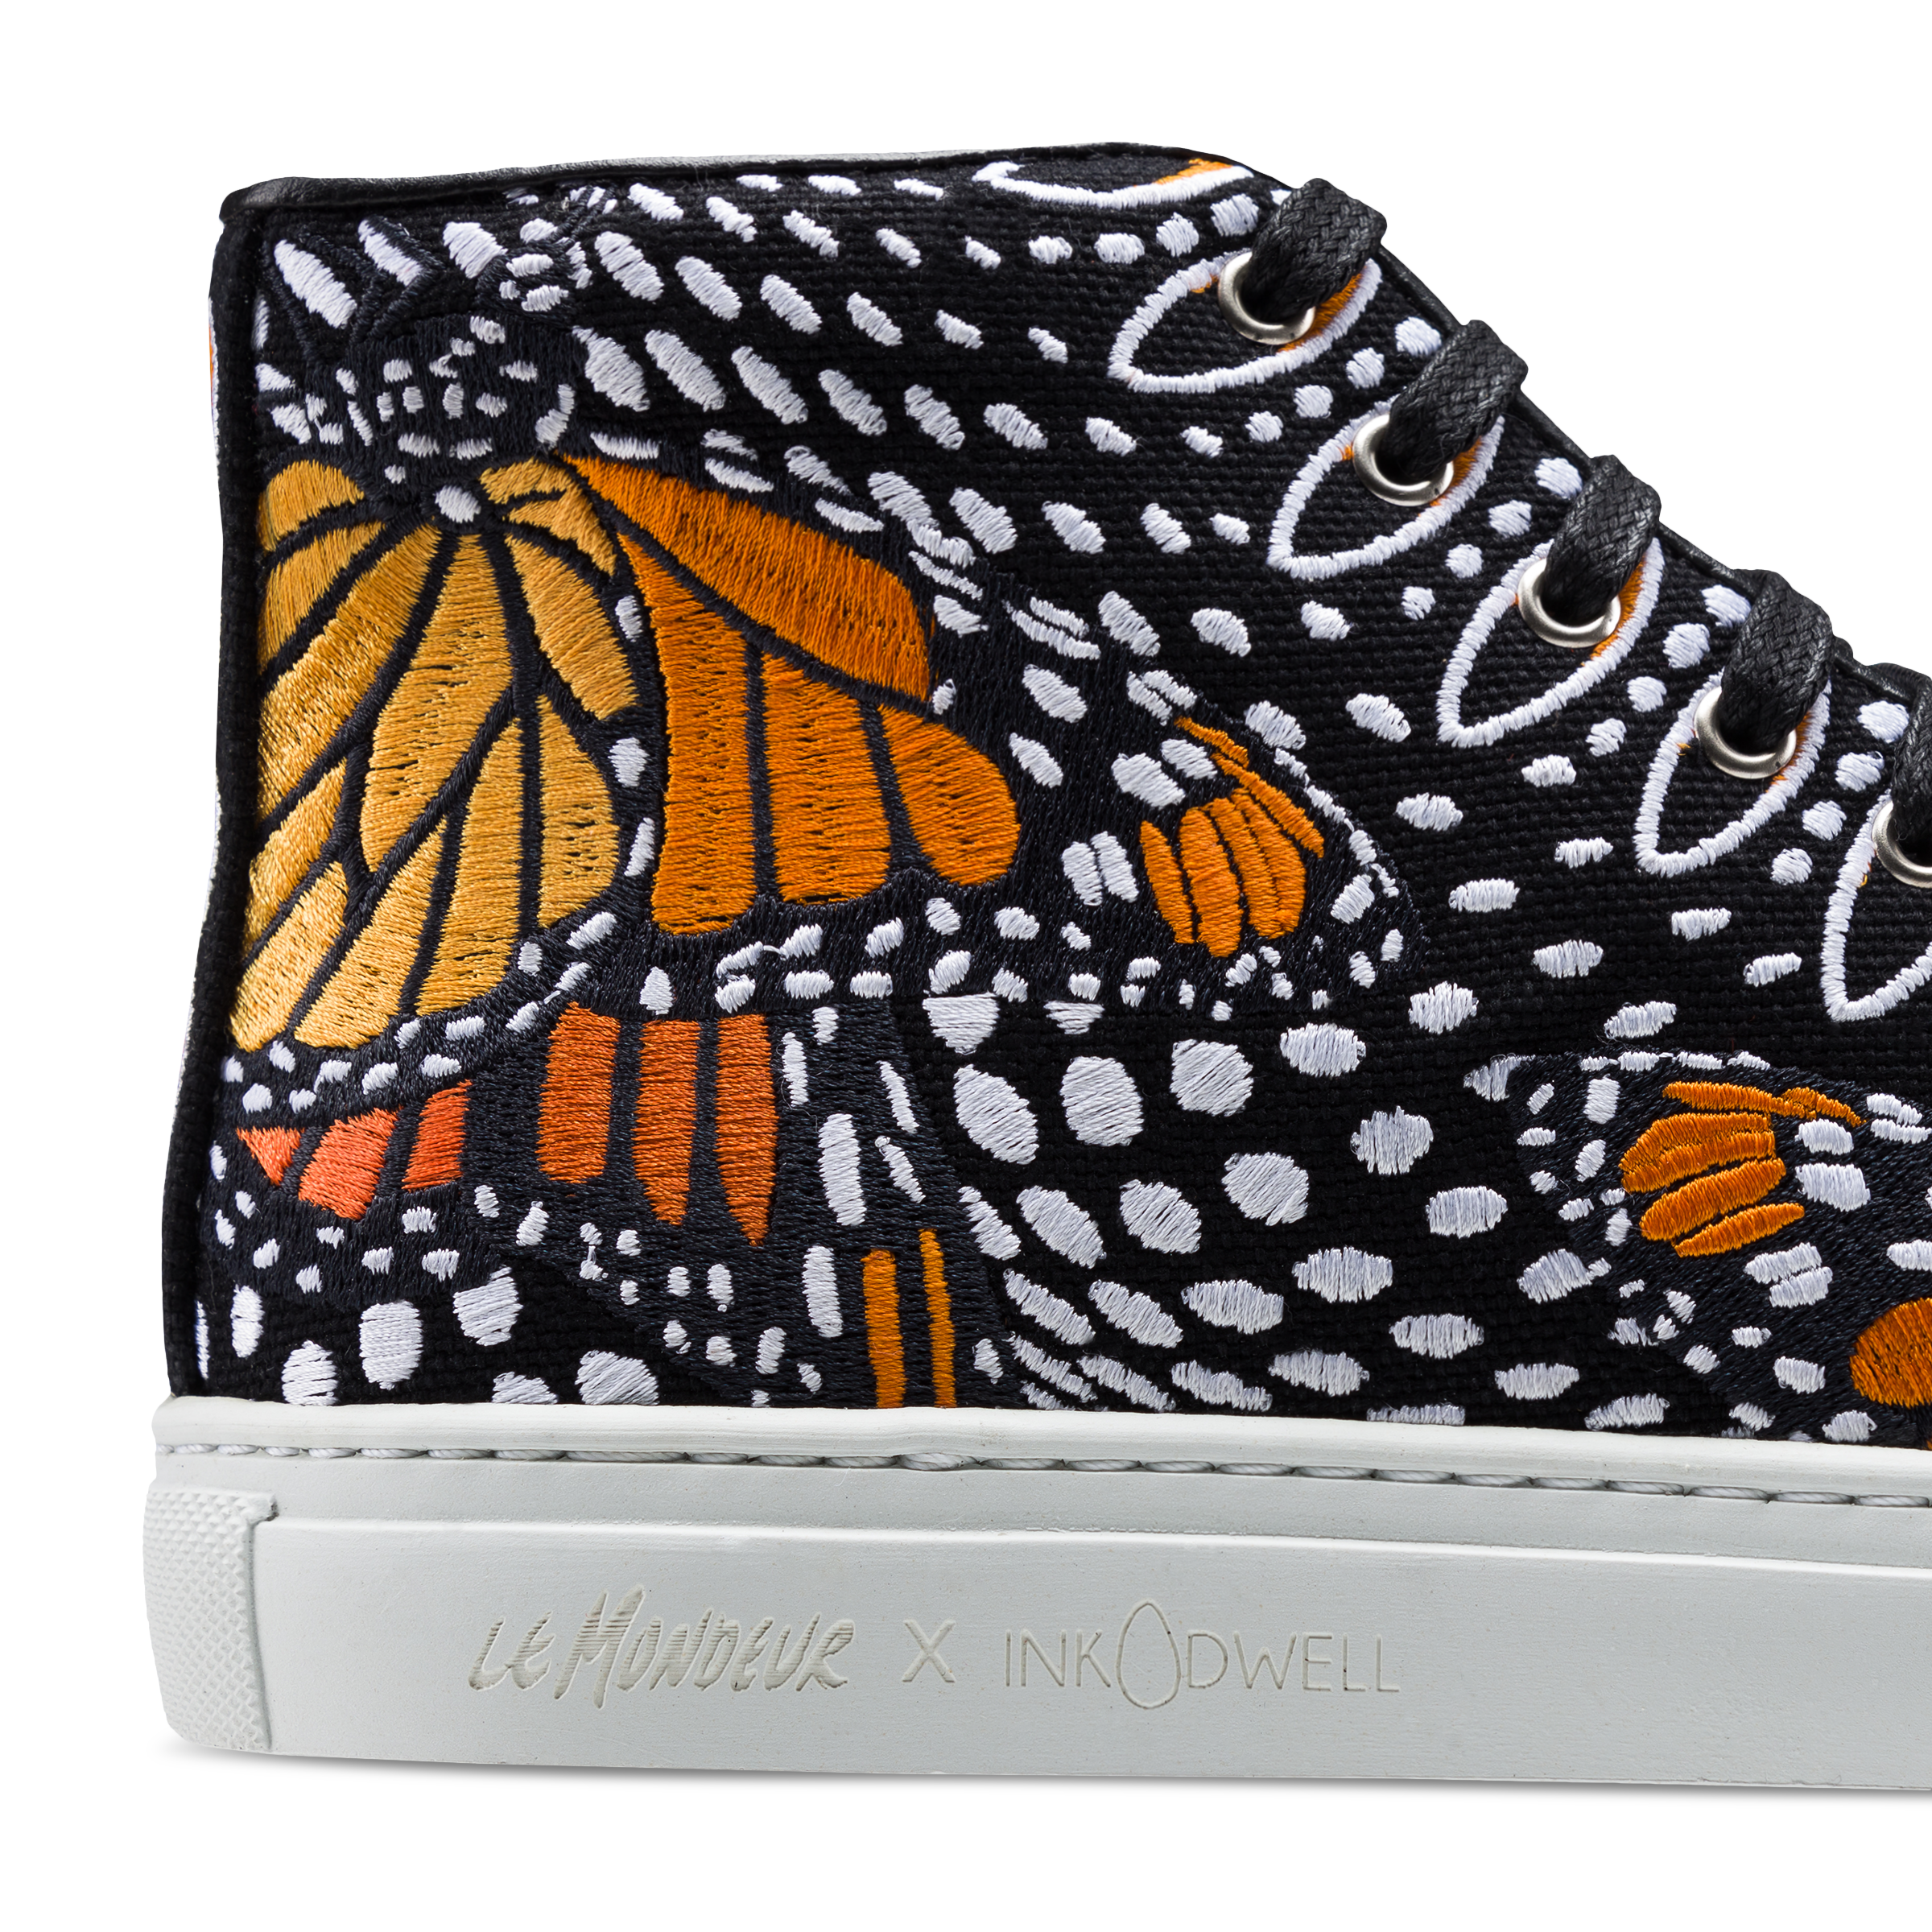 Monarch in Moda - High Top by Le Mondeur x Ink Dwell